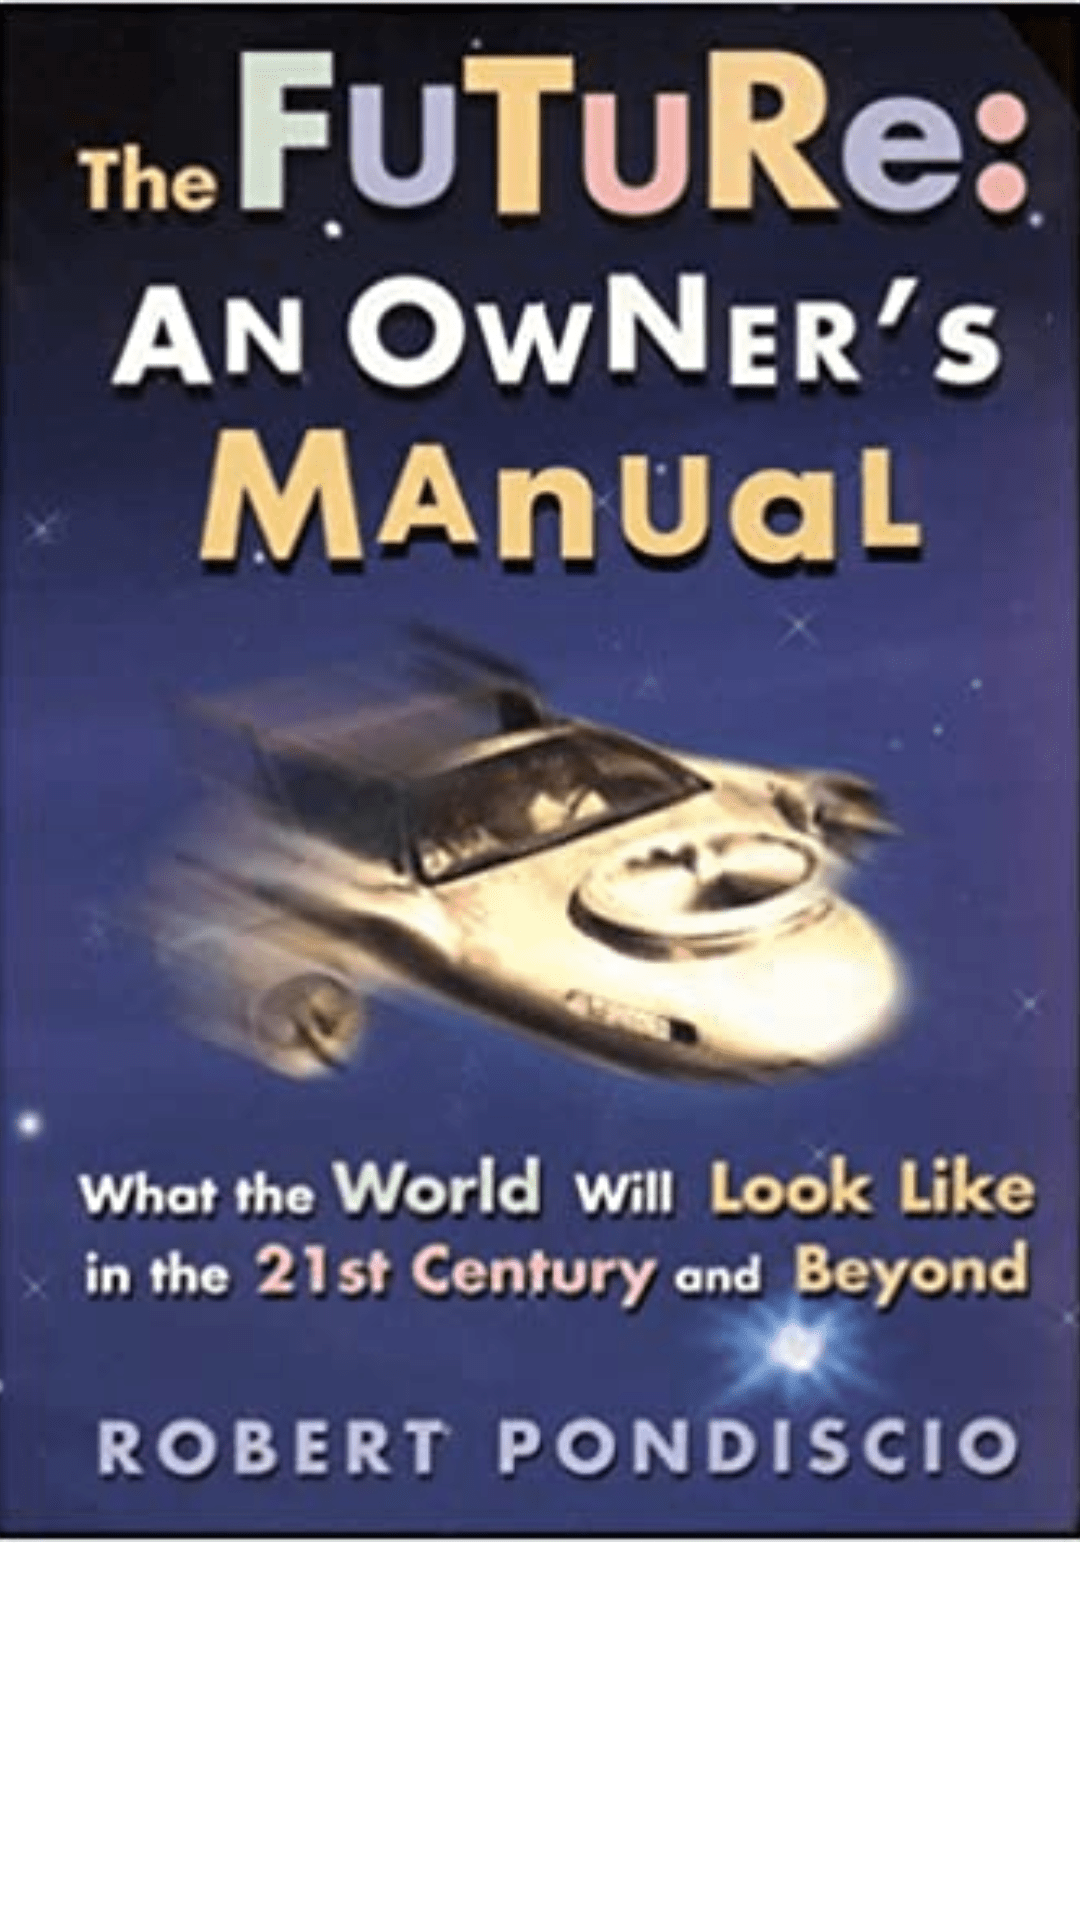 The Future: An Owner's Manual : what the World Will Look Like in the 21st Century and Beyond